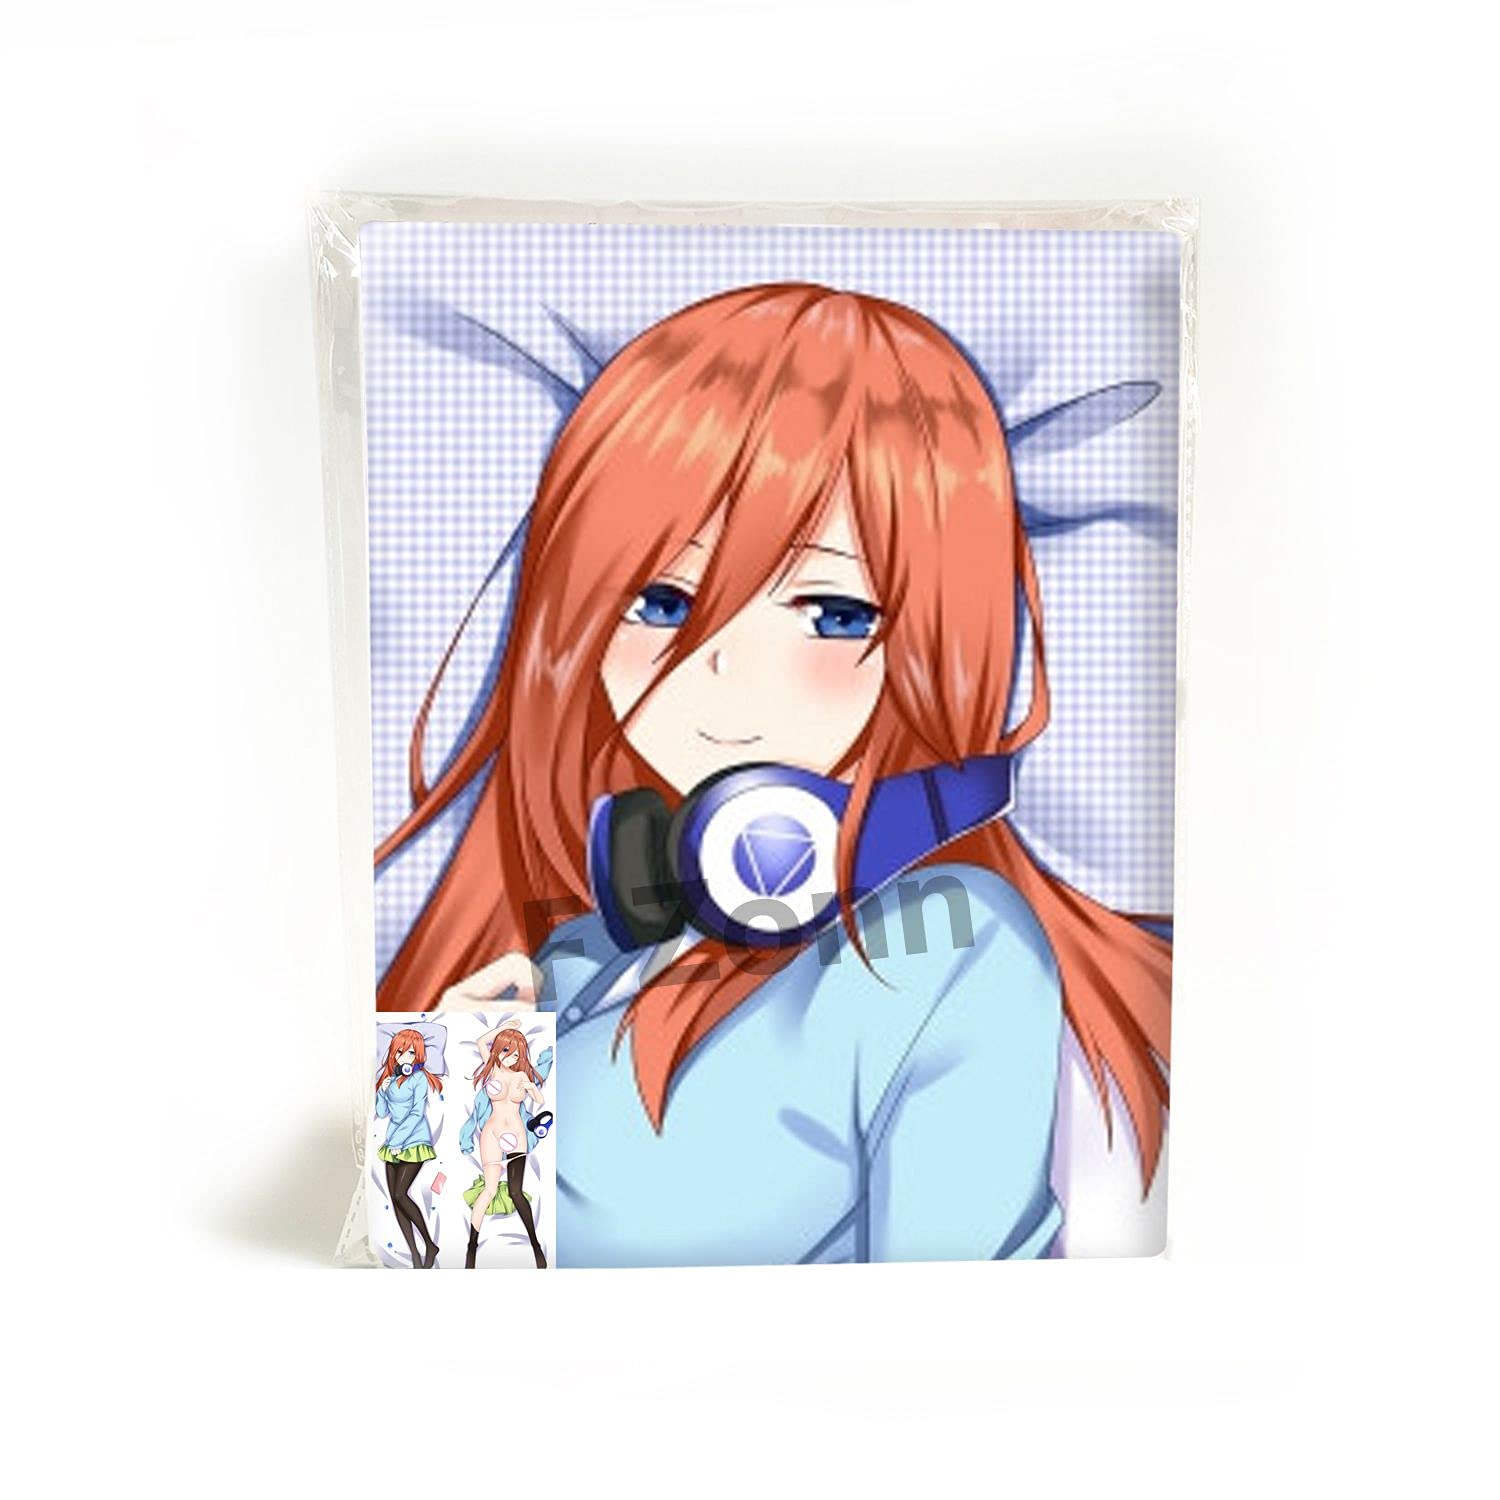 F Zonn The Quintessential Quintuplets Nakano Miku Anime Body Pillowcase 150 x 50cm(59in x 19.6in) 2 Way Tricot Japanese Fans Gift Throw Pillow Cover